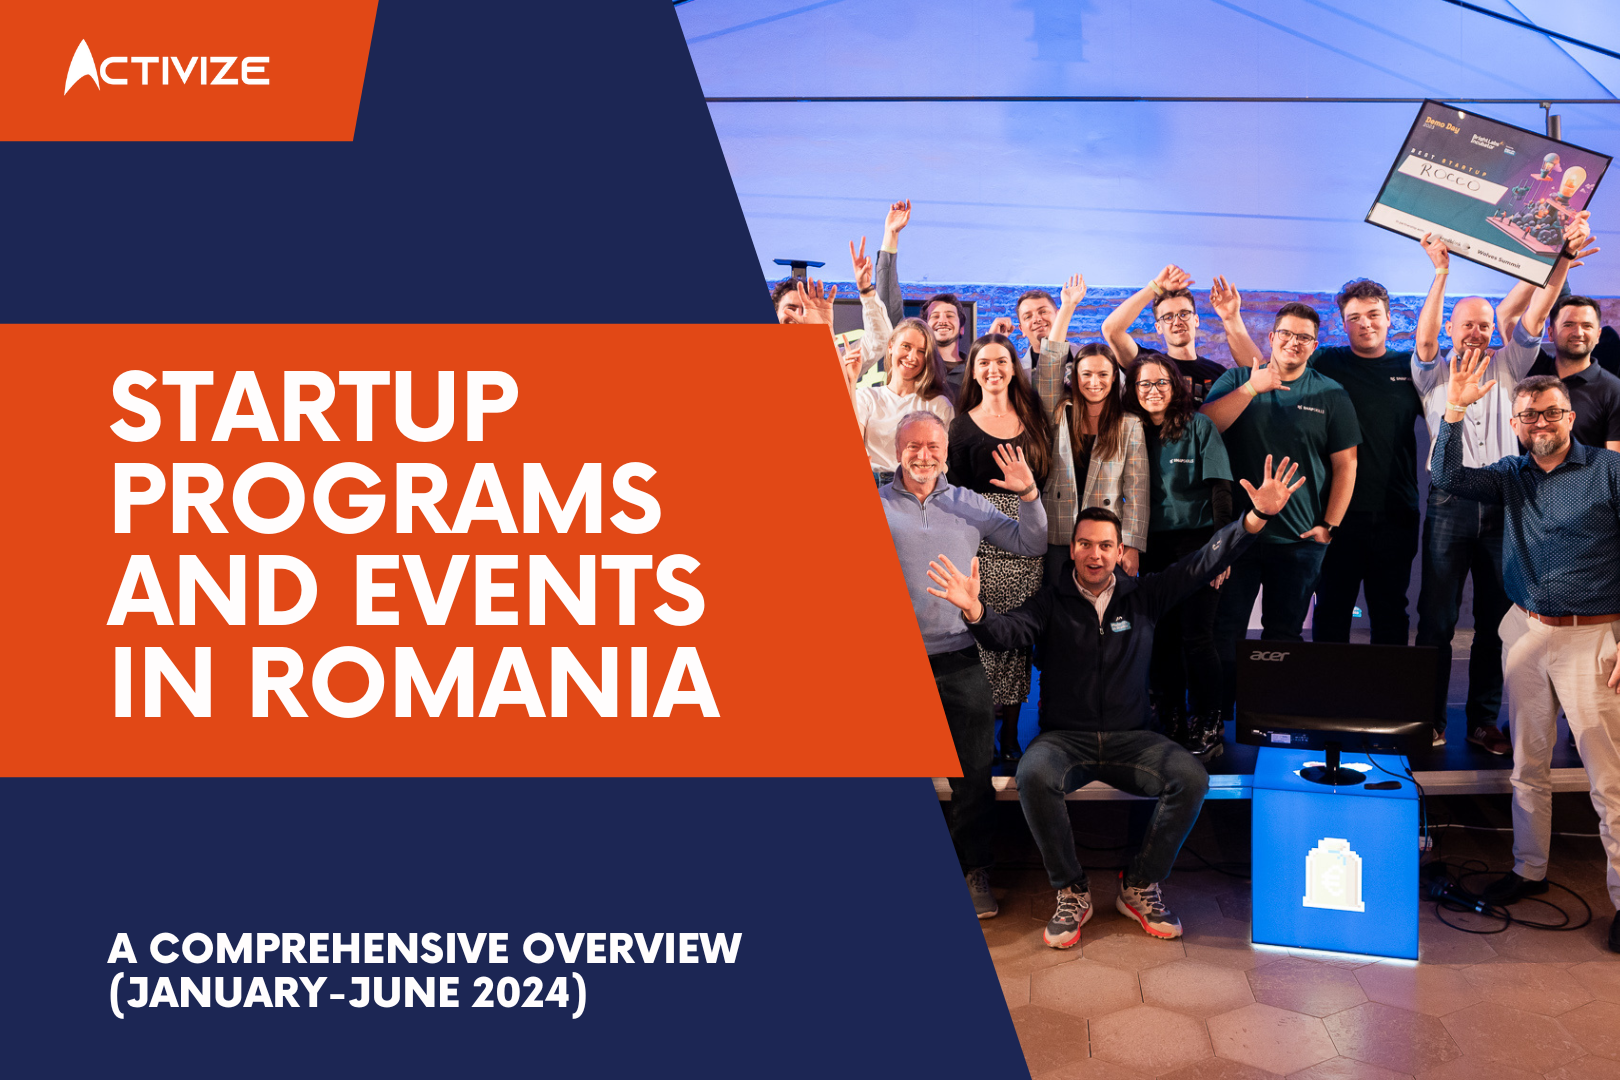 In the first half of 2024, the Romanian startup ecosystem has already seen a flurry of impactful events and programs. To offer a comprehensive snapshot, we’ve curated a list highlighting some of the most significant ones during this time.